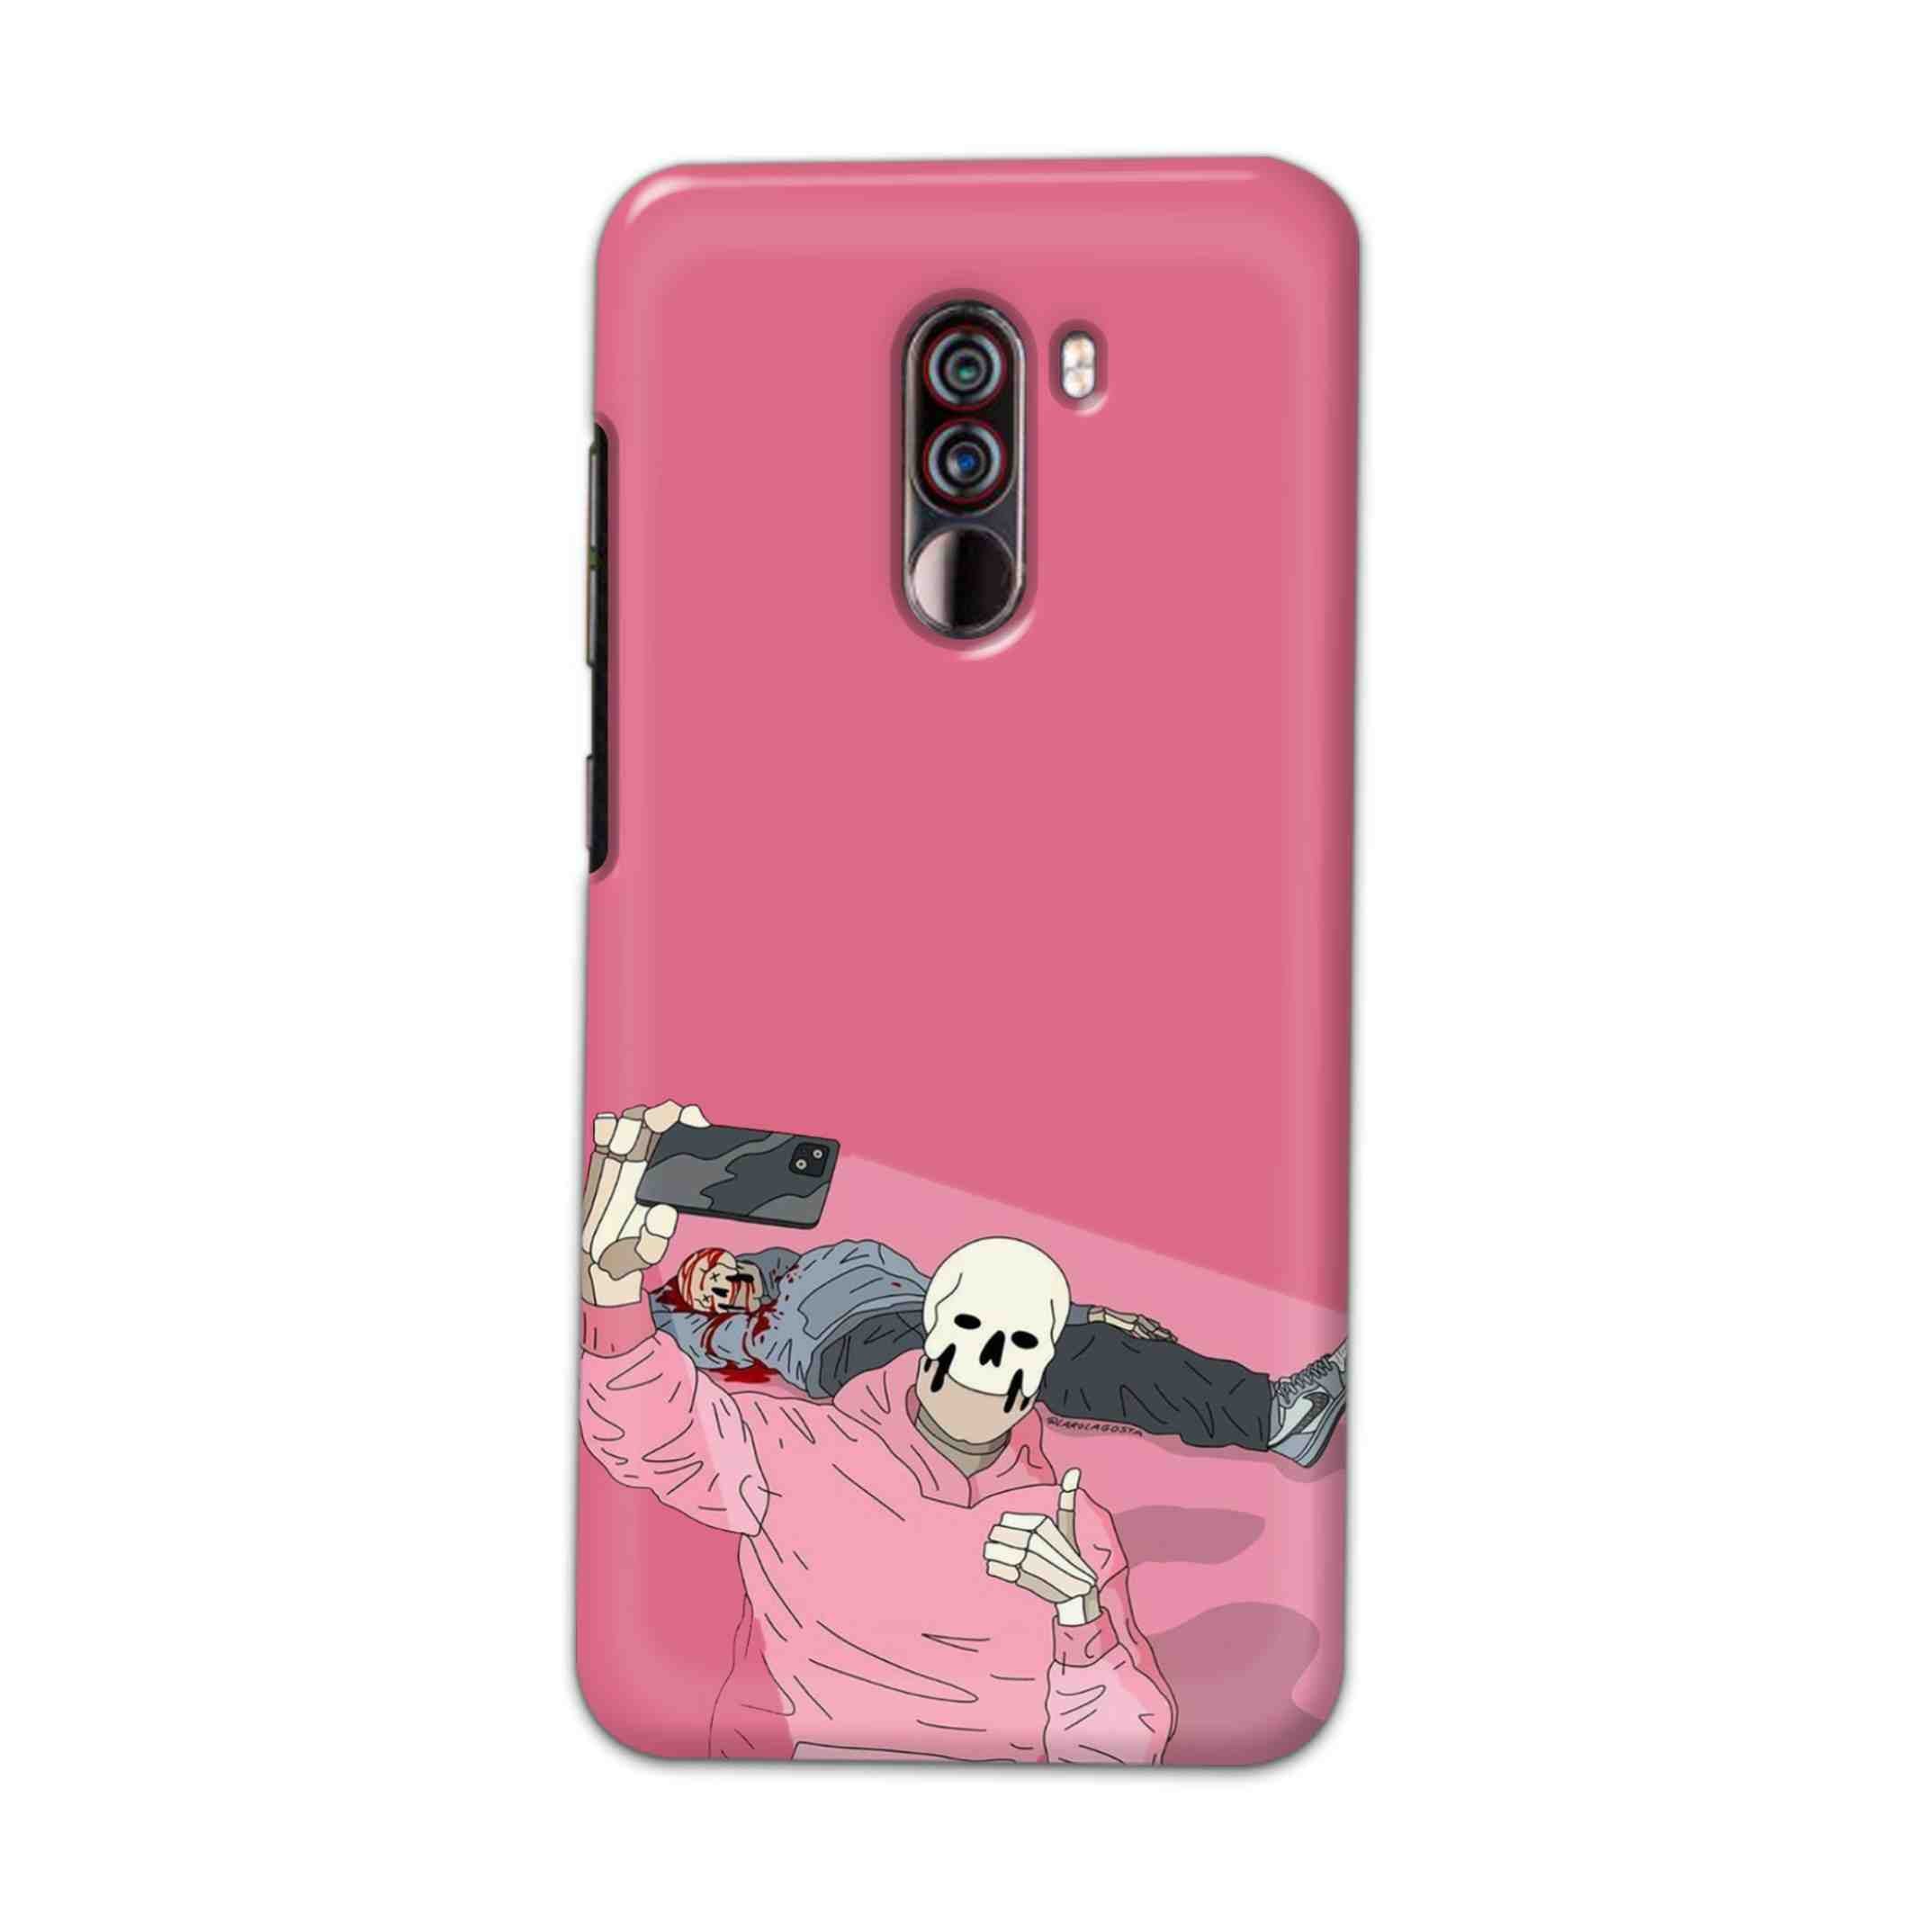 Buy Selfie Hard Back Mobile Phone Case Cover For Xiaomi Pocophone F1 Online